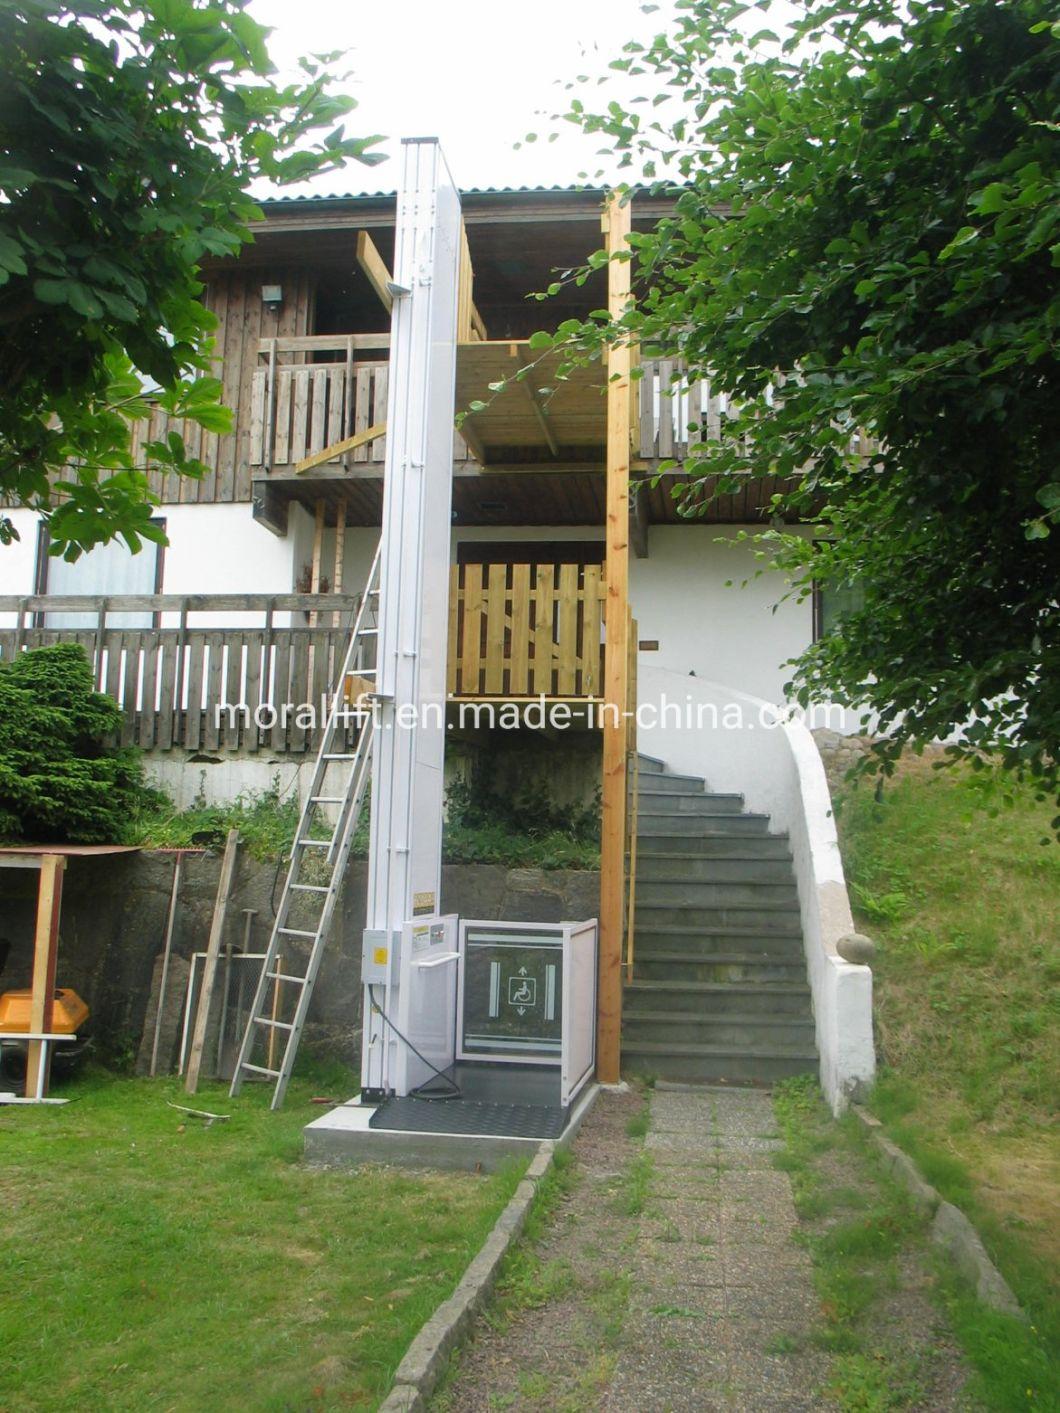 300kg Hydraulic Driven Disabled Home Lift Wheelchair Lift